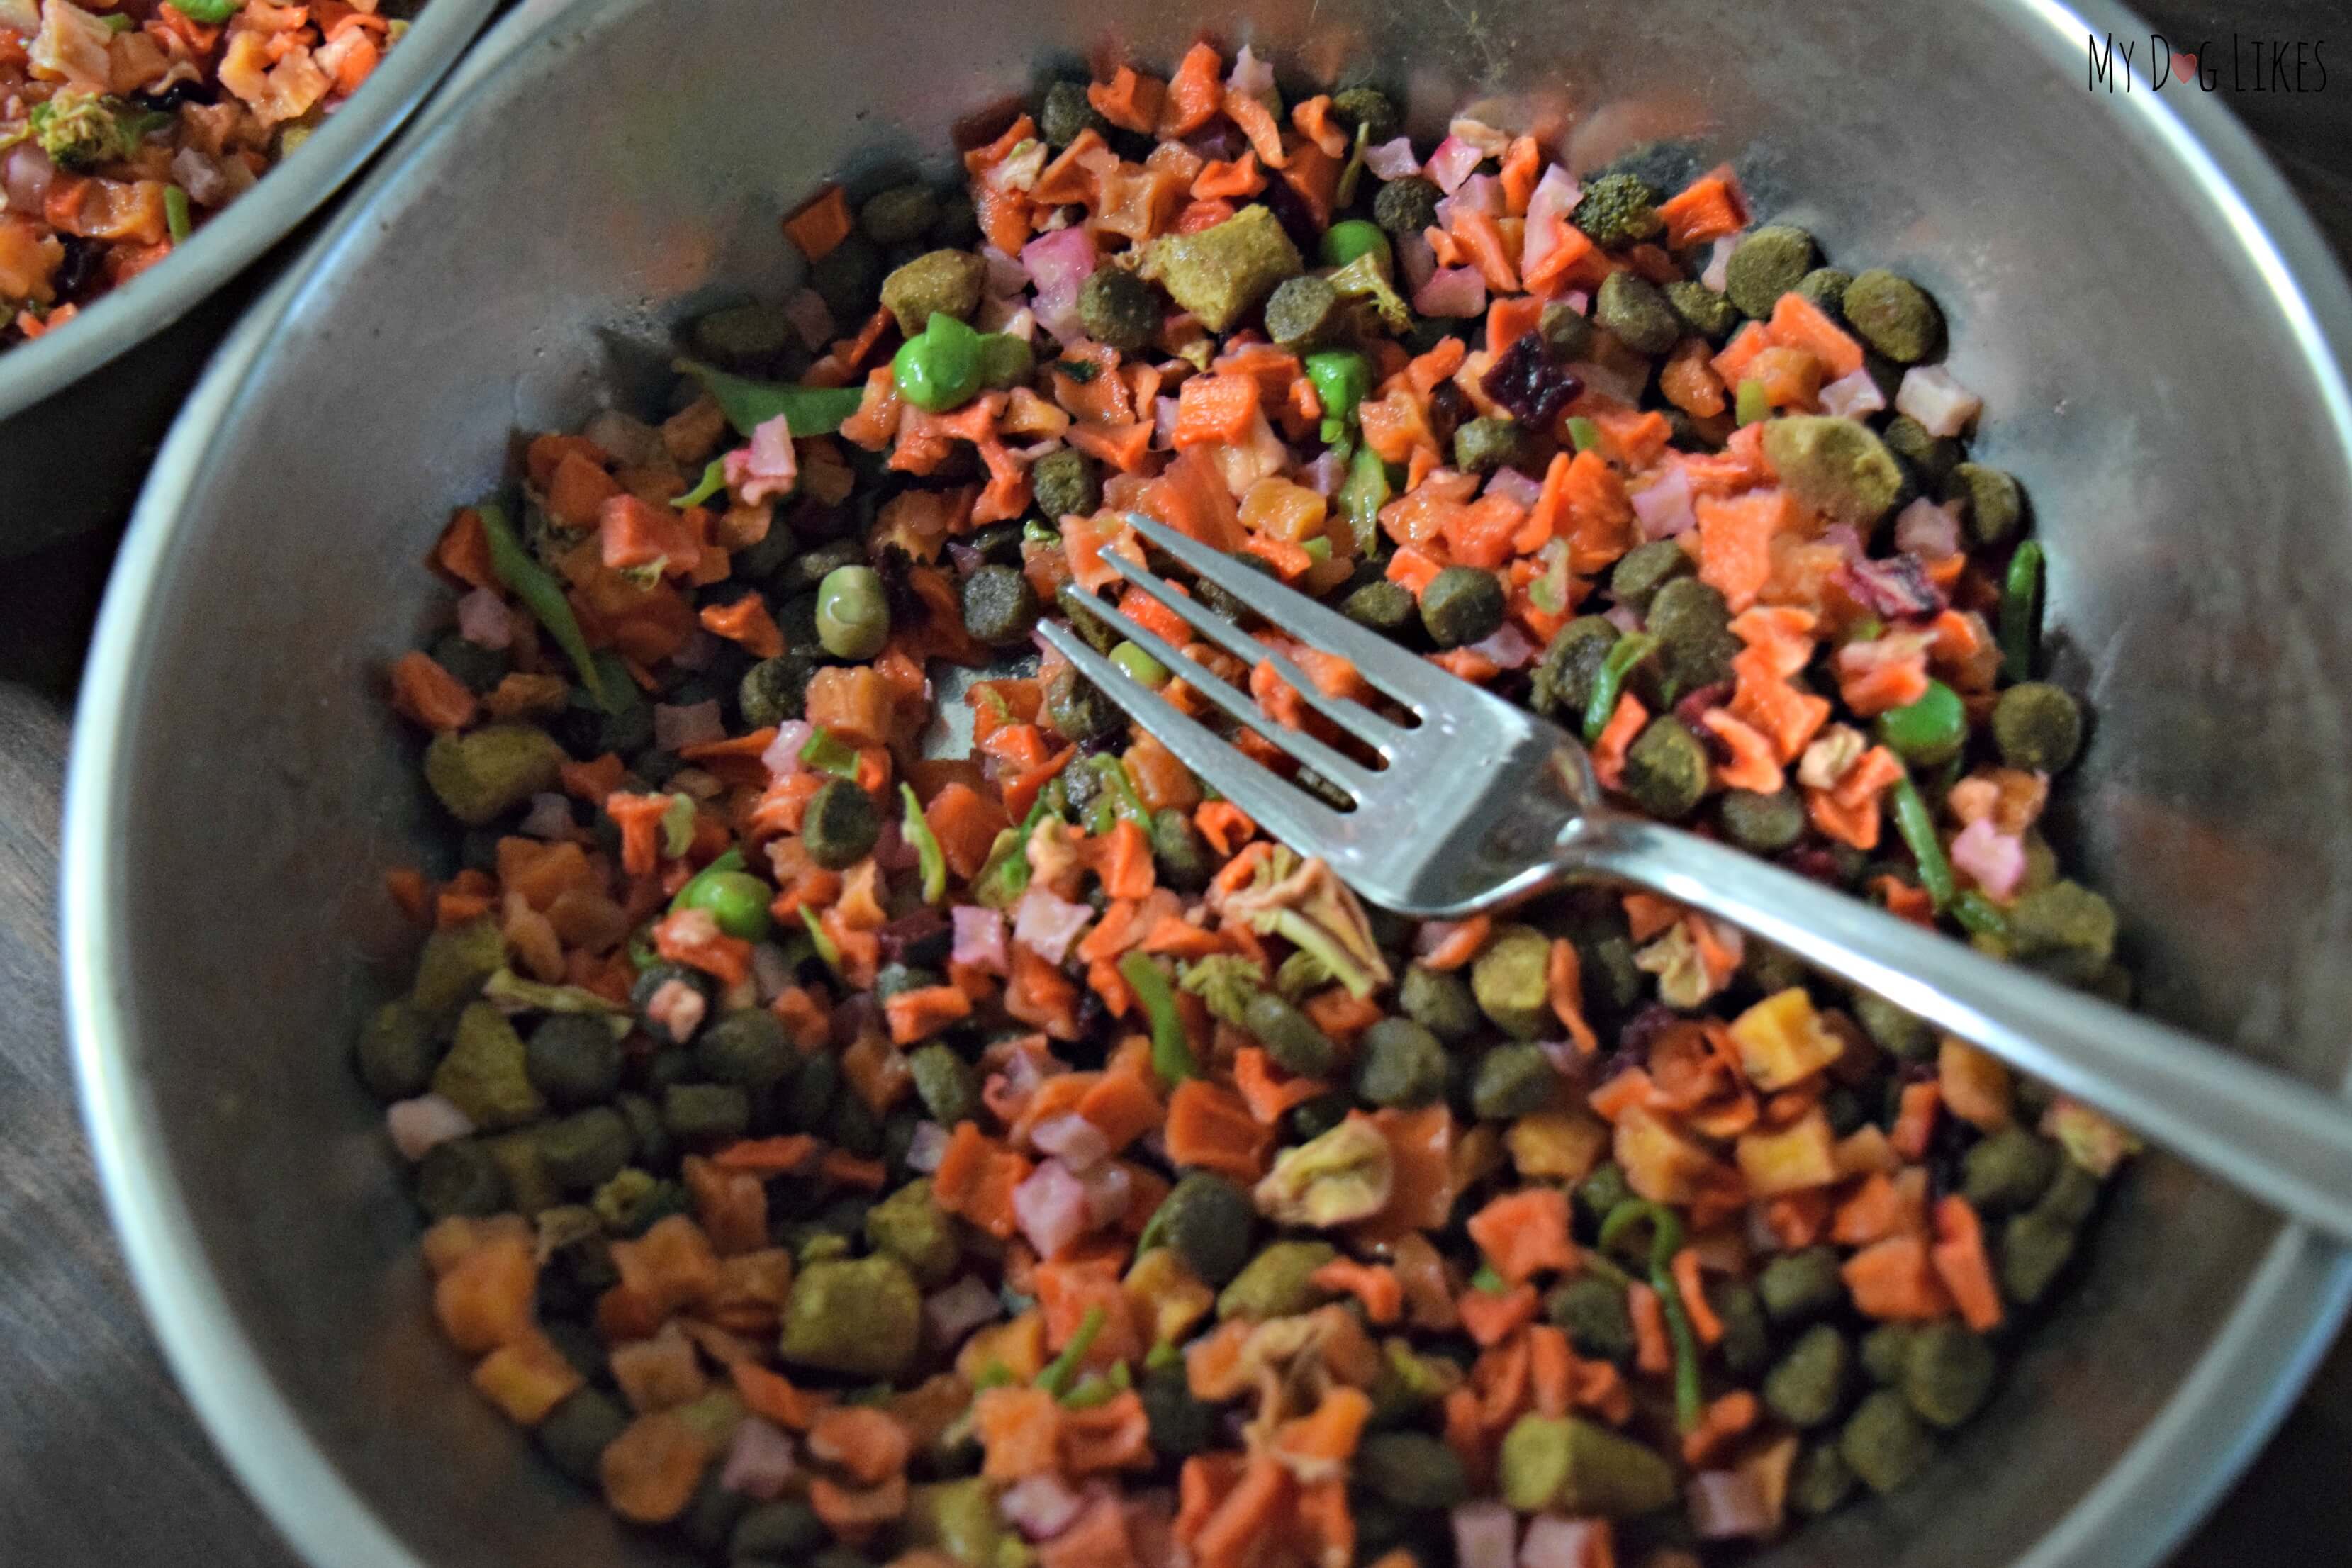 New Year, New You - Learning How to Make Your Own Dog Food
